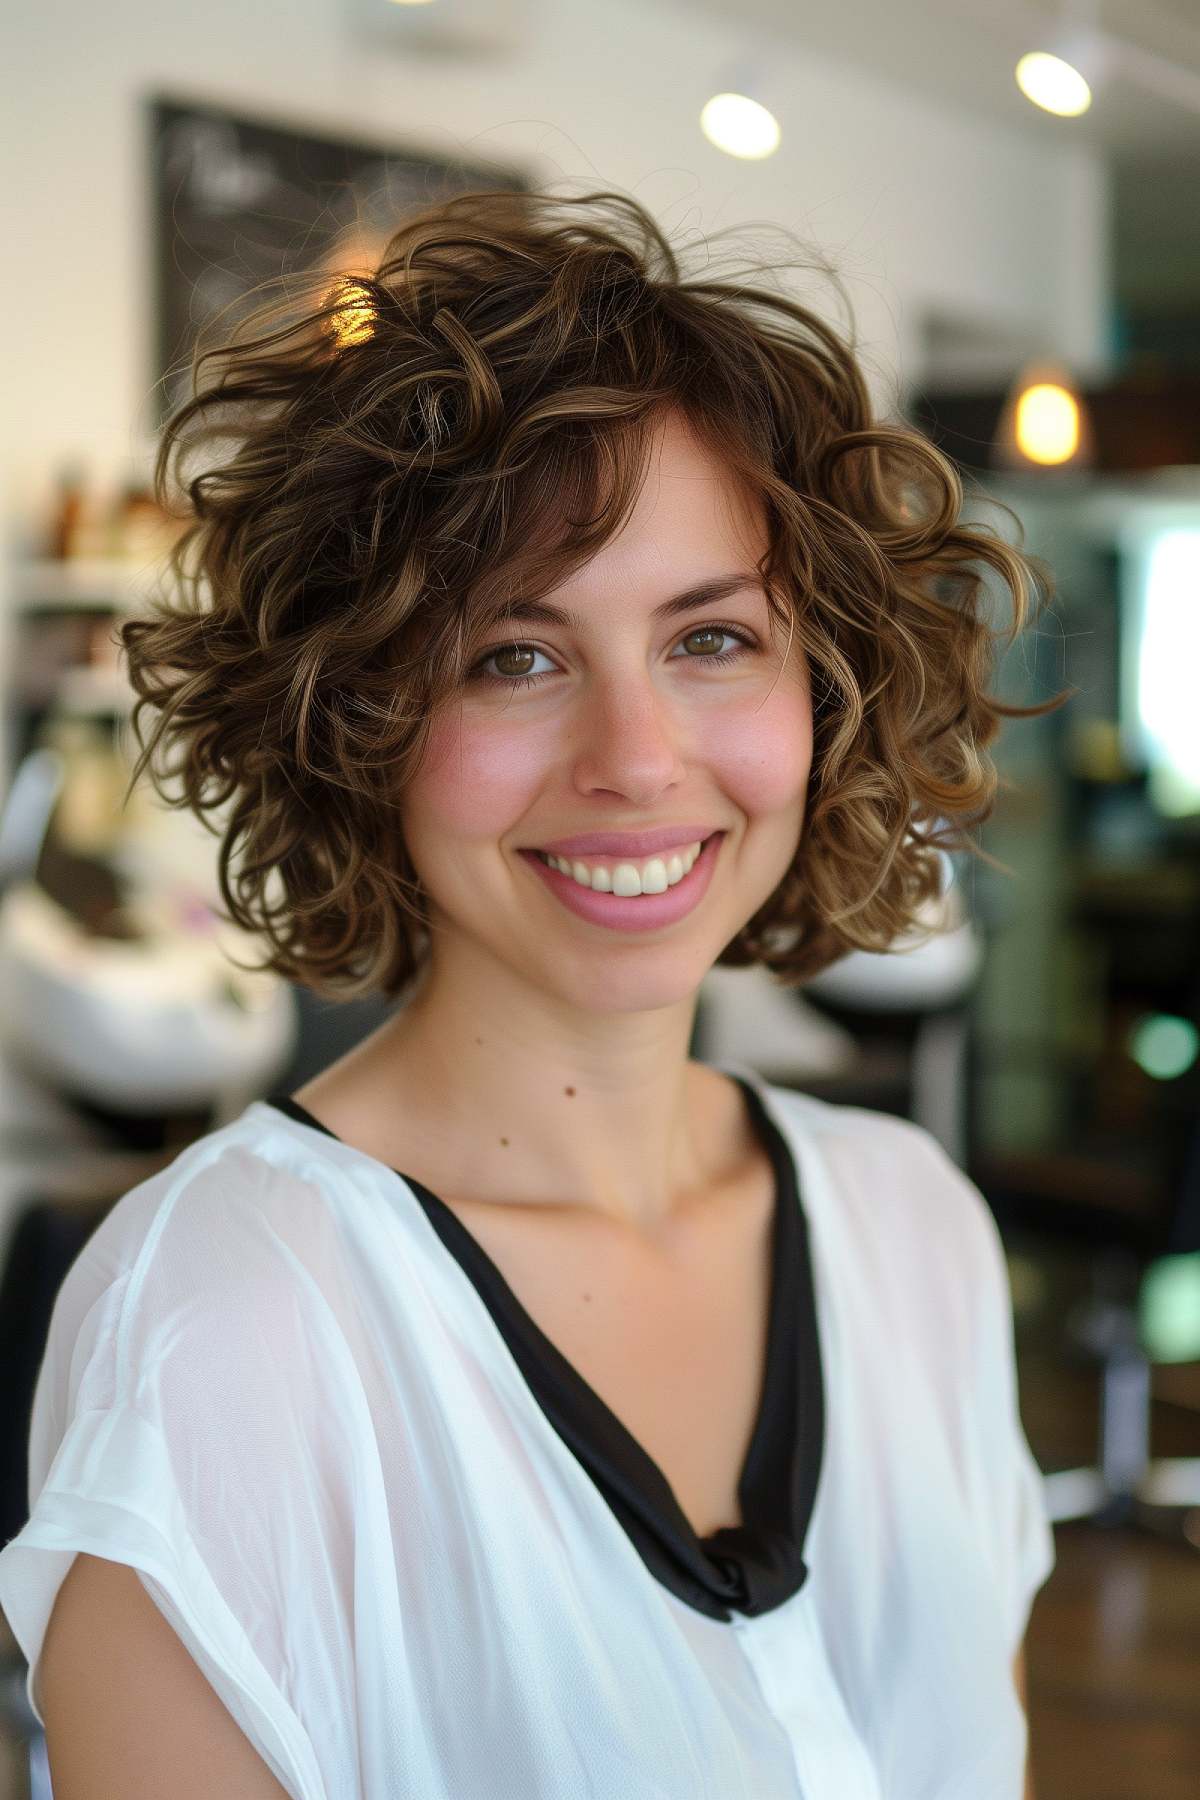 Natural Curls with Subtle Highlights in Short Bob Hairstyle